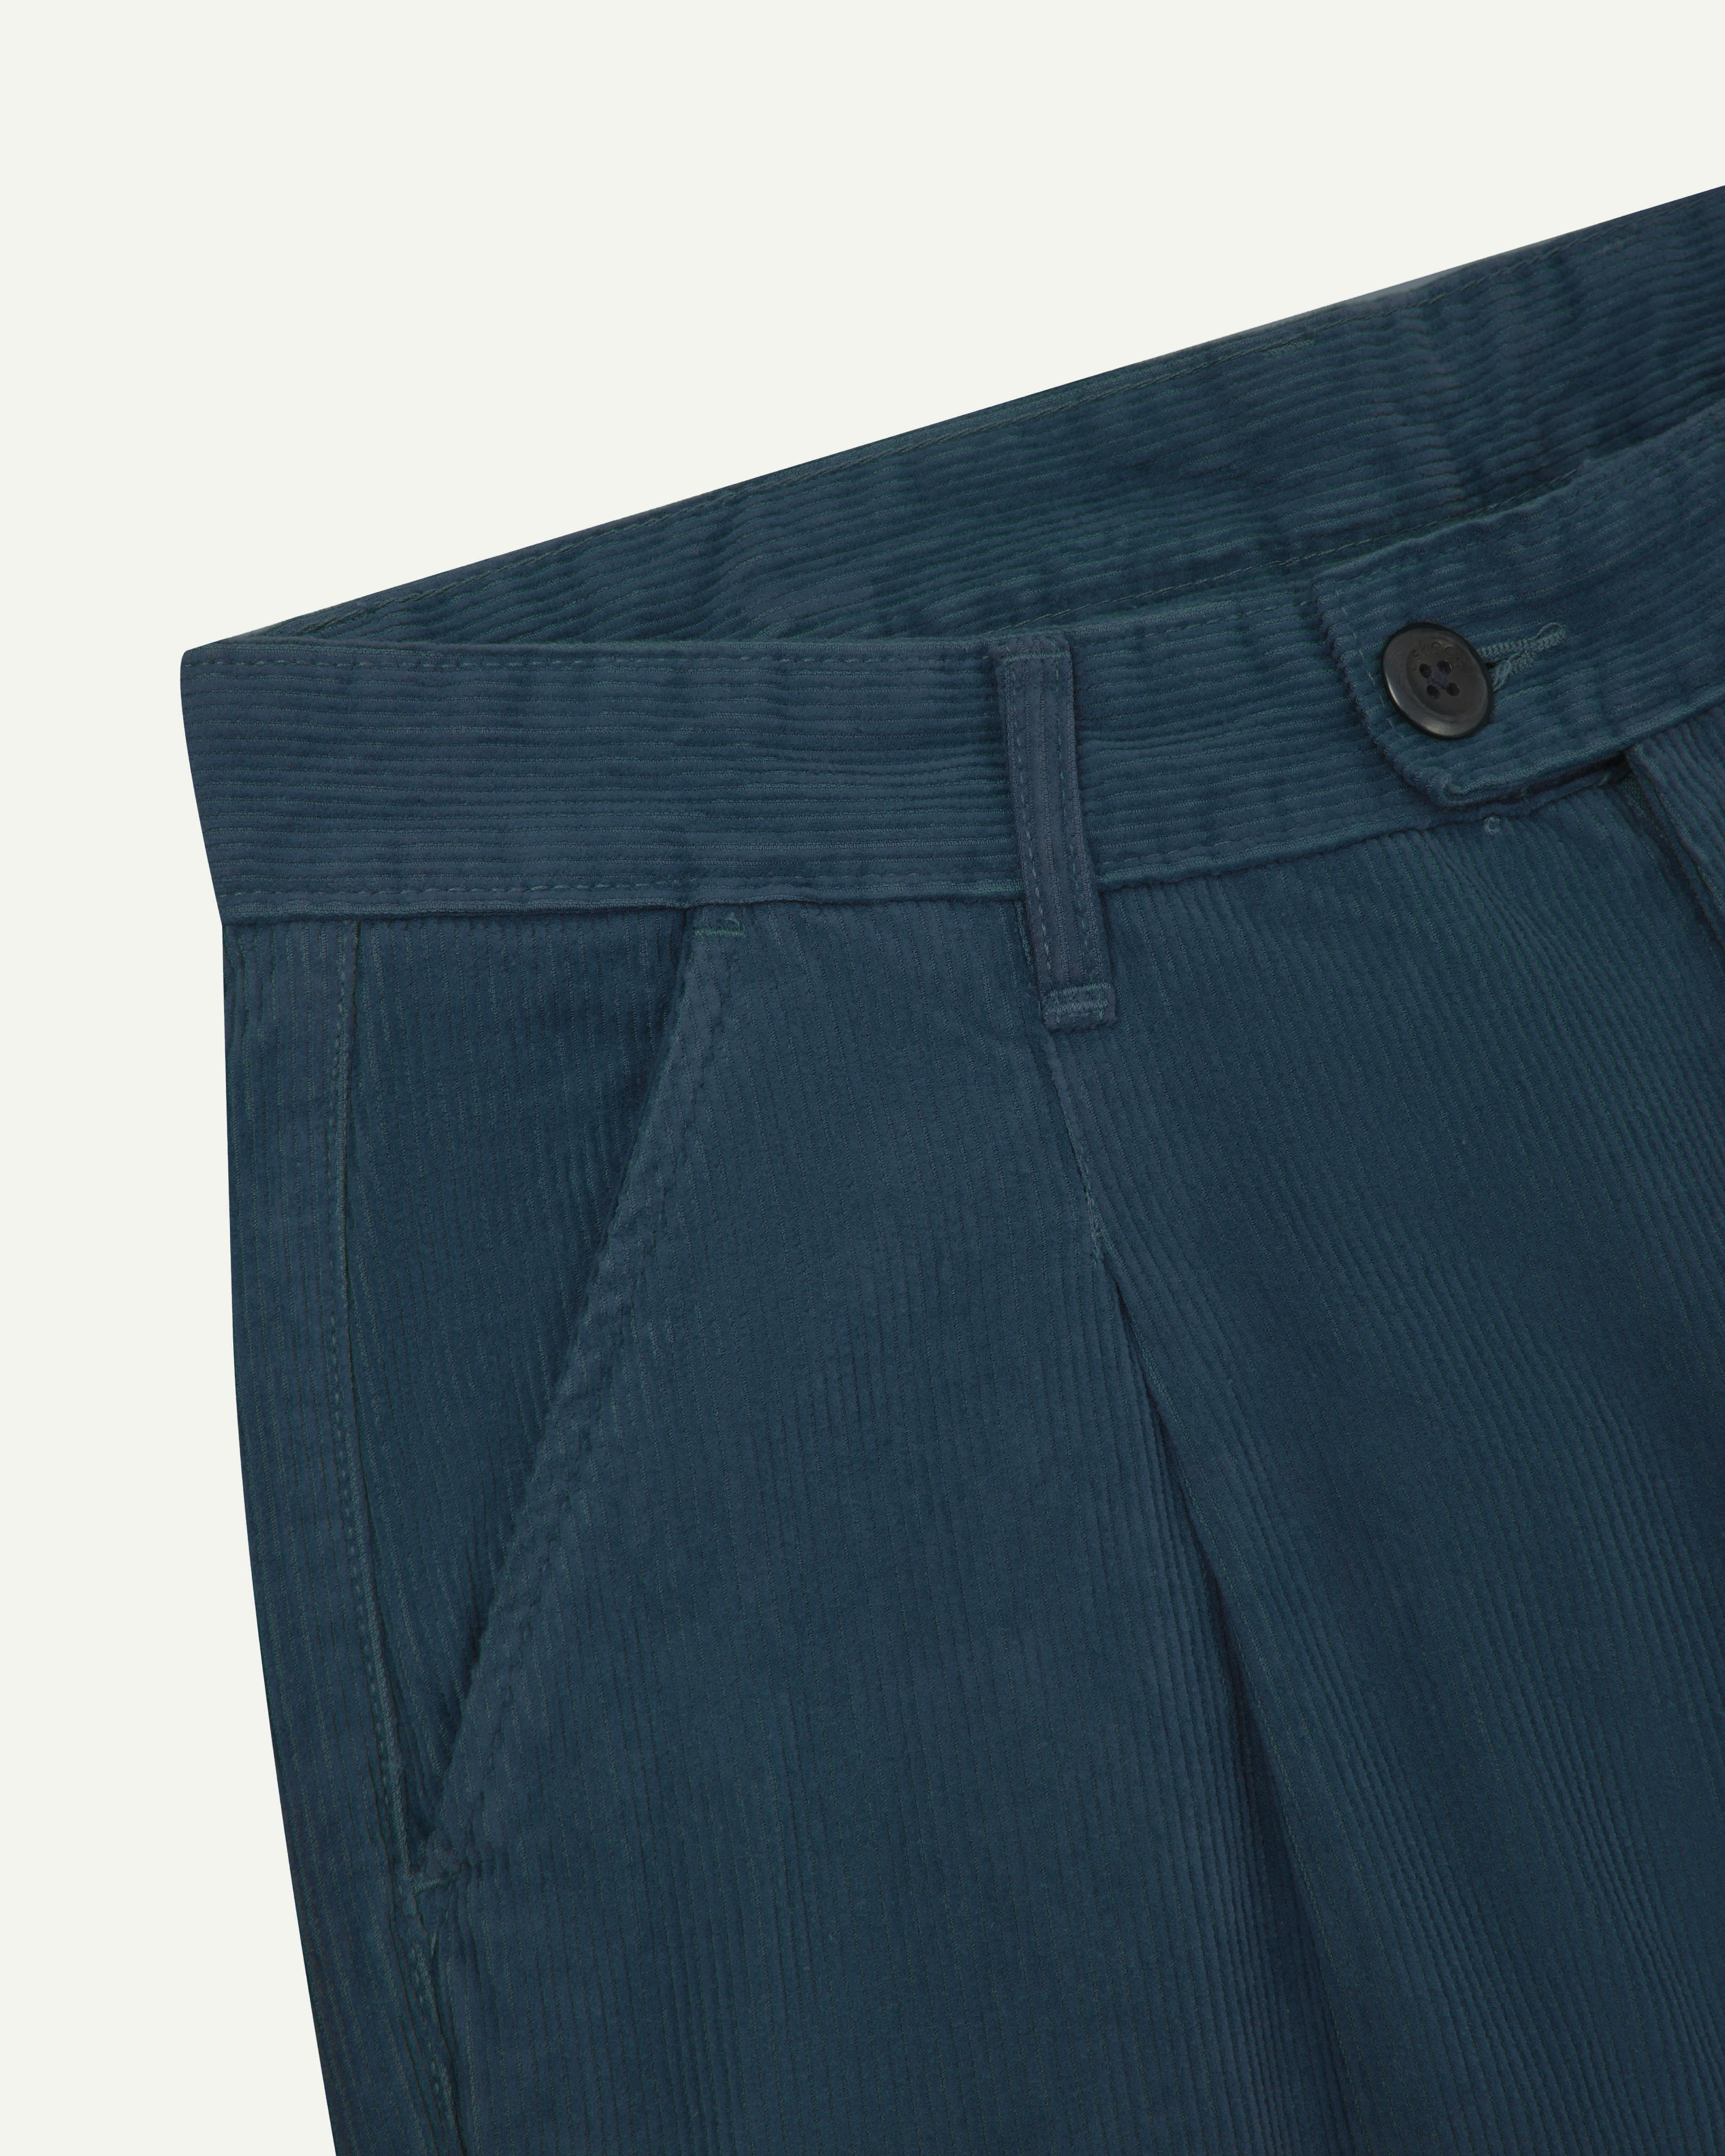 Close up of Uskees cord boat pants in petrol blue showing belt loops and Corozo button fastening.